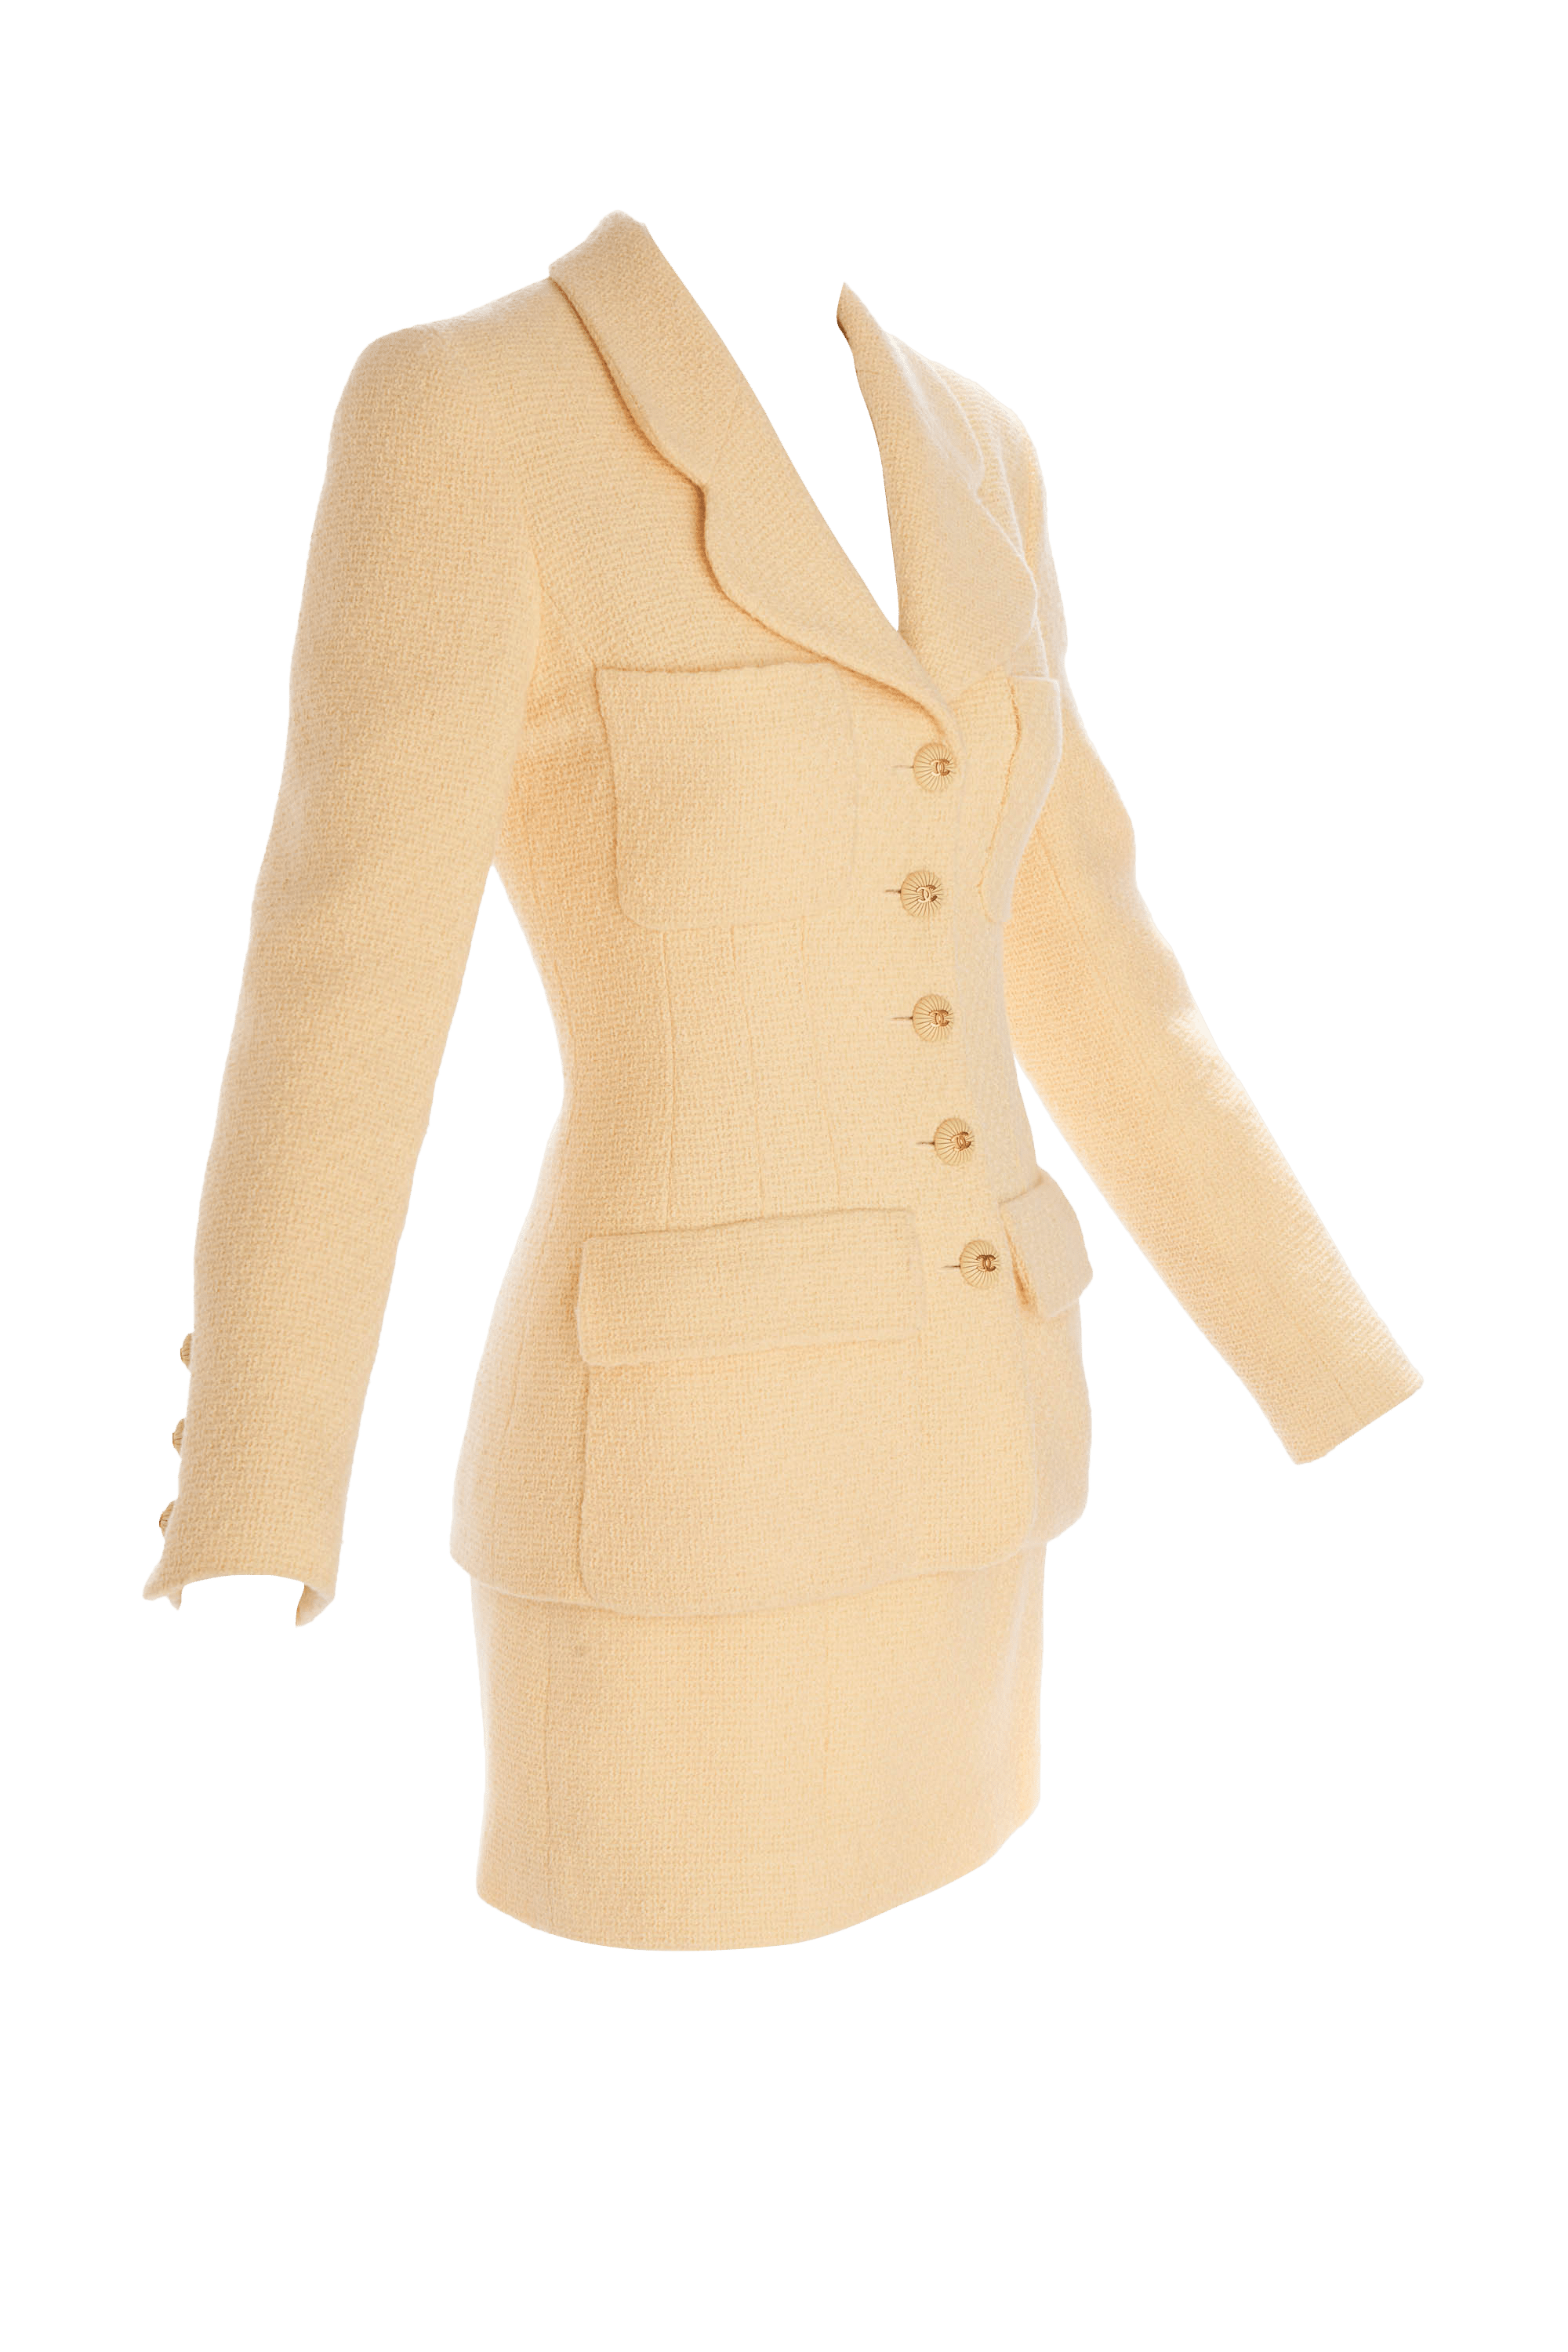 Chanel Yellow Tweed Skirt and Jacket Set Size 36 - Foxy Couture Carmel